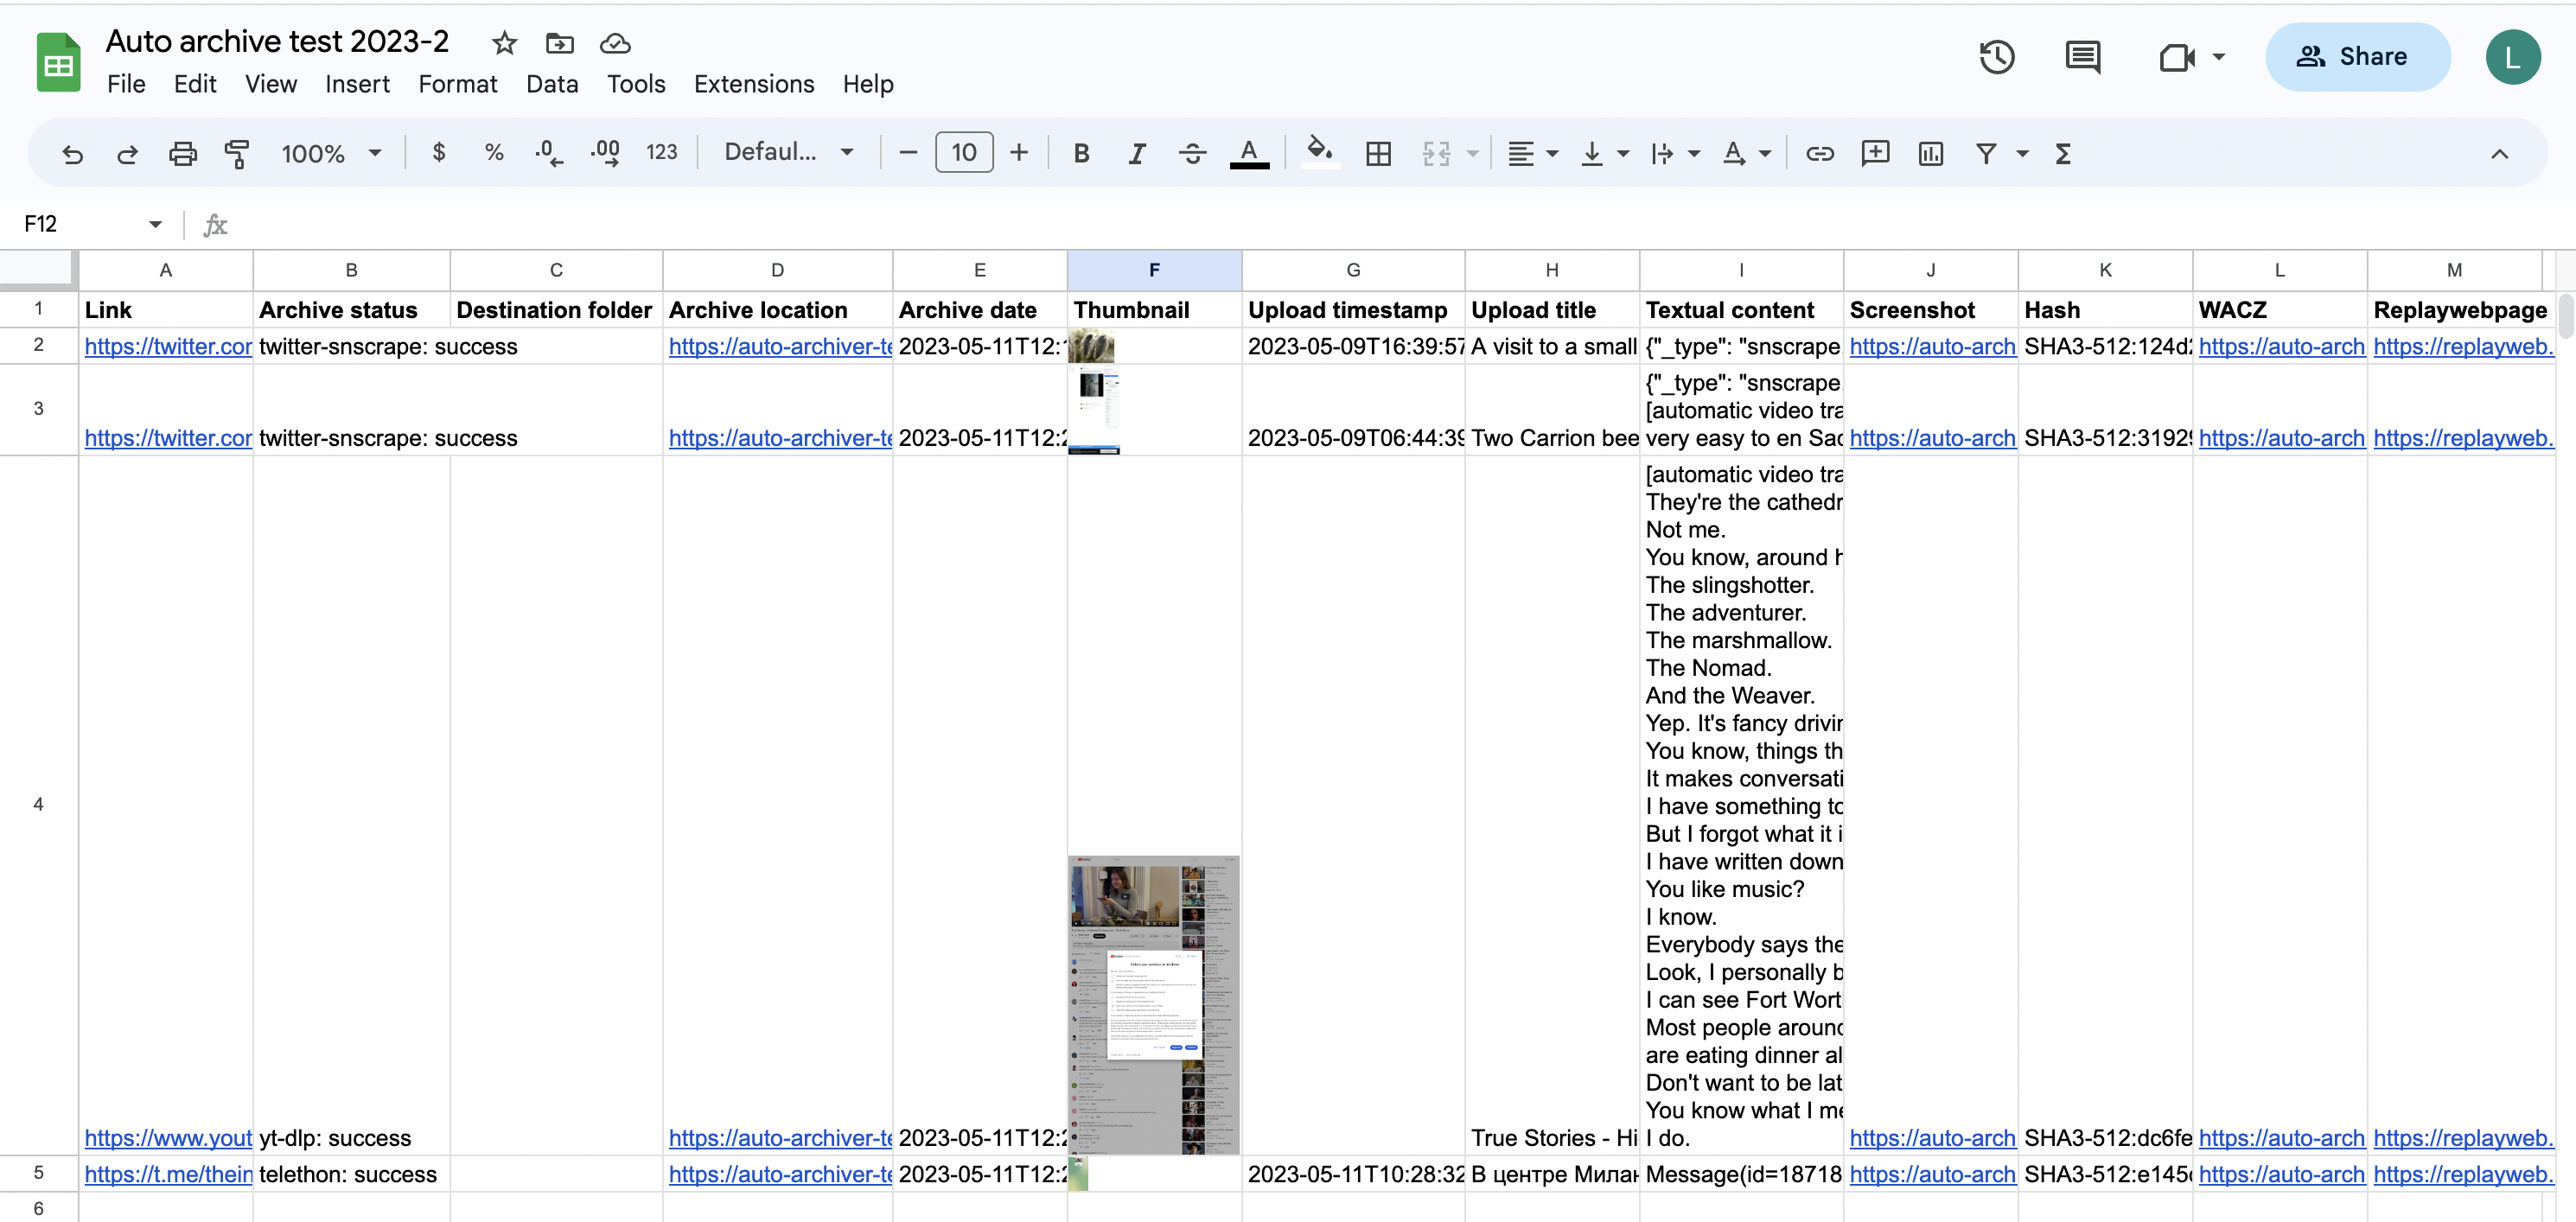 A screenshot of a Google Spreadsheet with videos archived and metadata added per the description of the columns above.